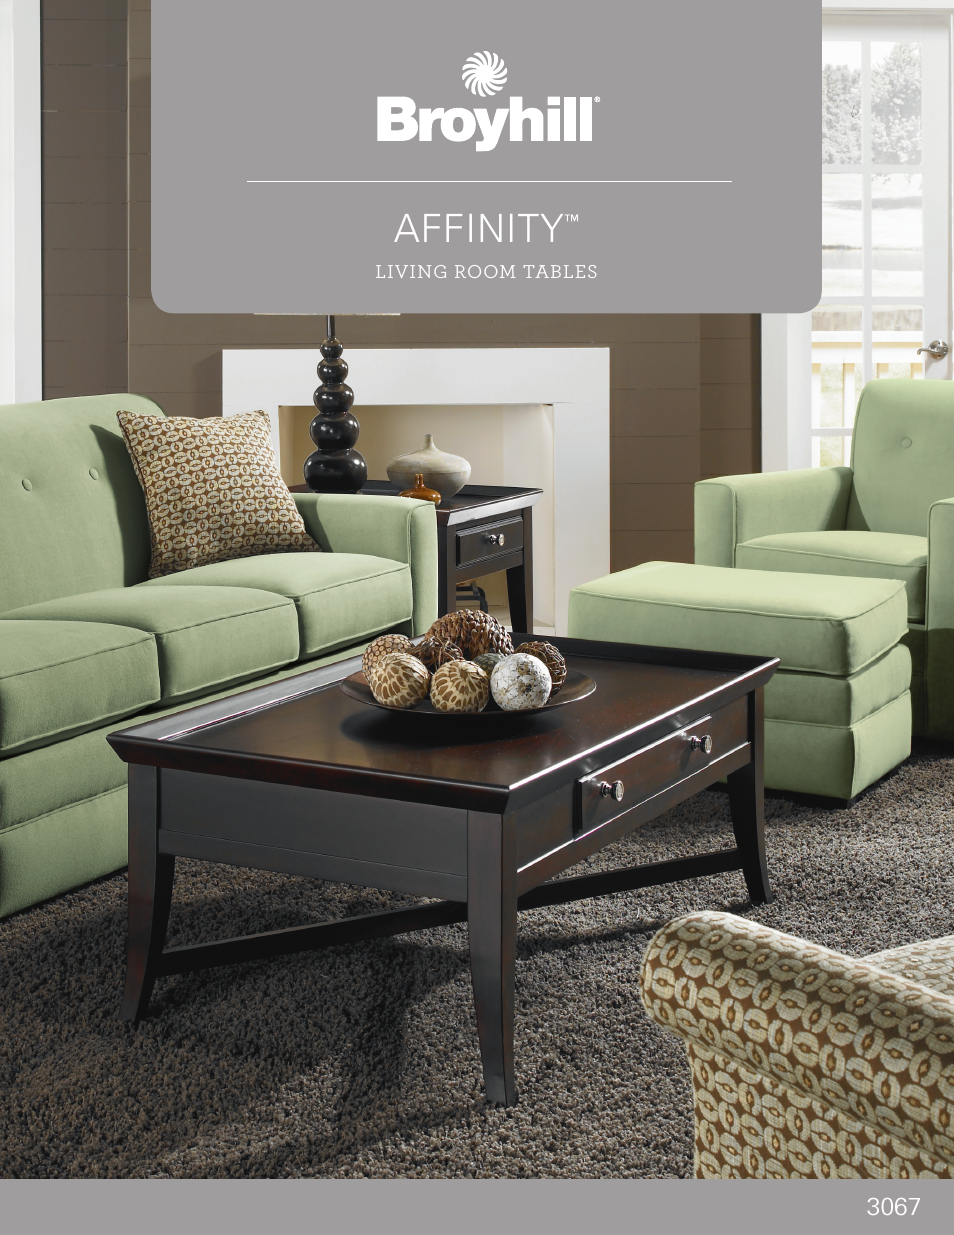 AFFINITY END TABLE Product Details